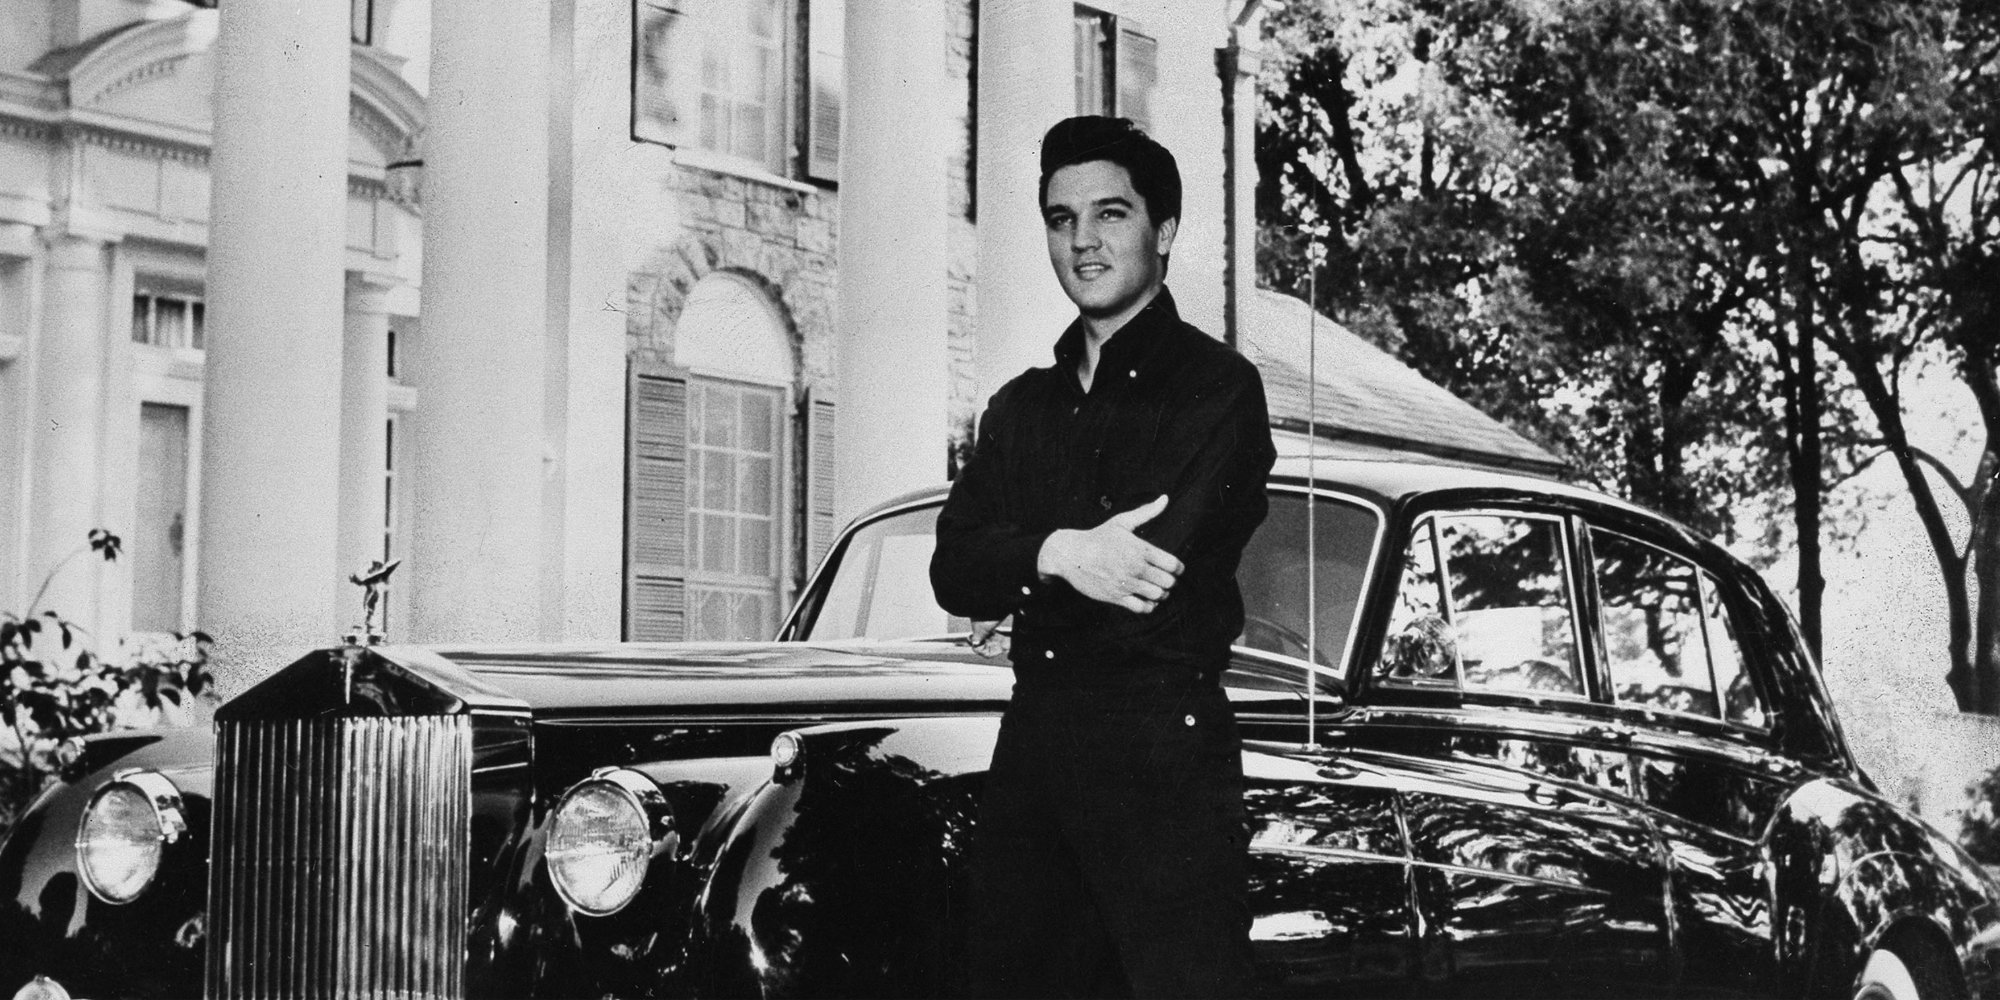 Elvis Presley: The Hidden Secret Within an Iconic Graceland Portrait of the King of Rock and Roll